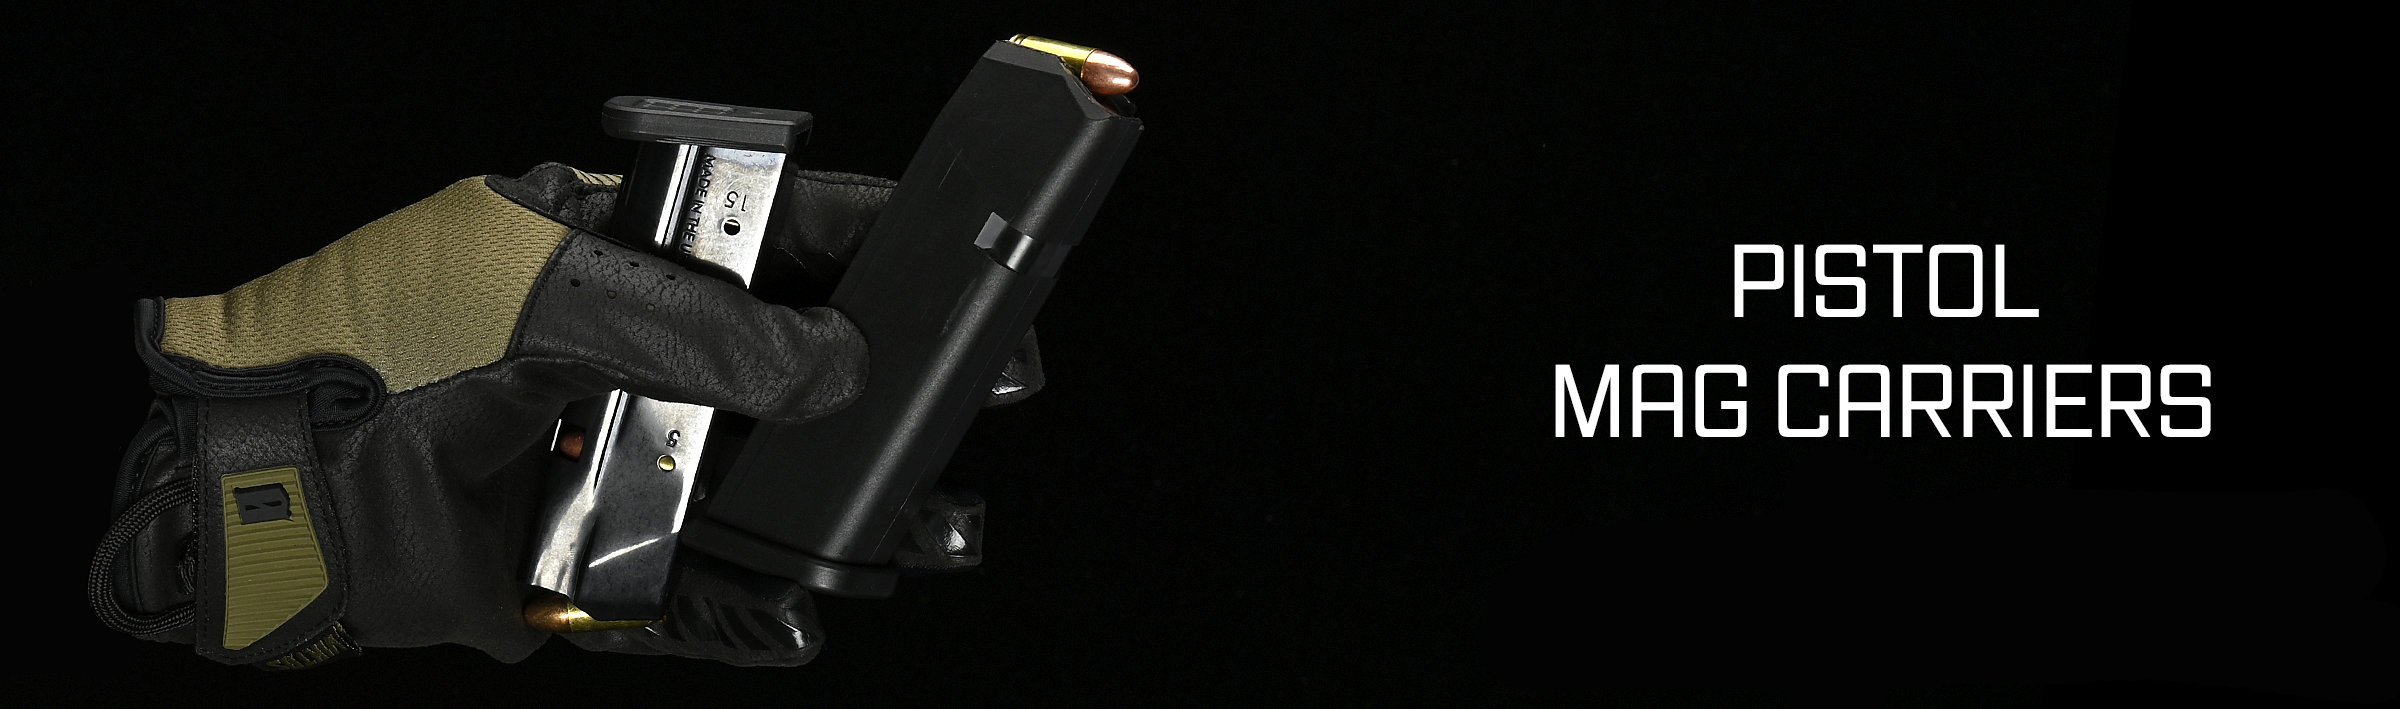 Pistol Mag Carriers